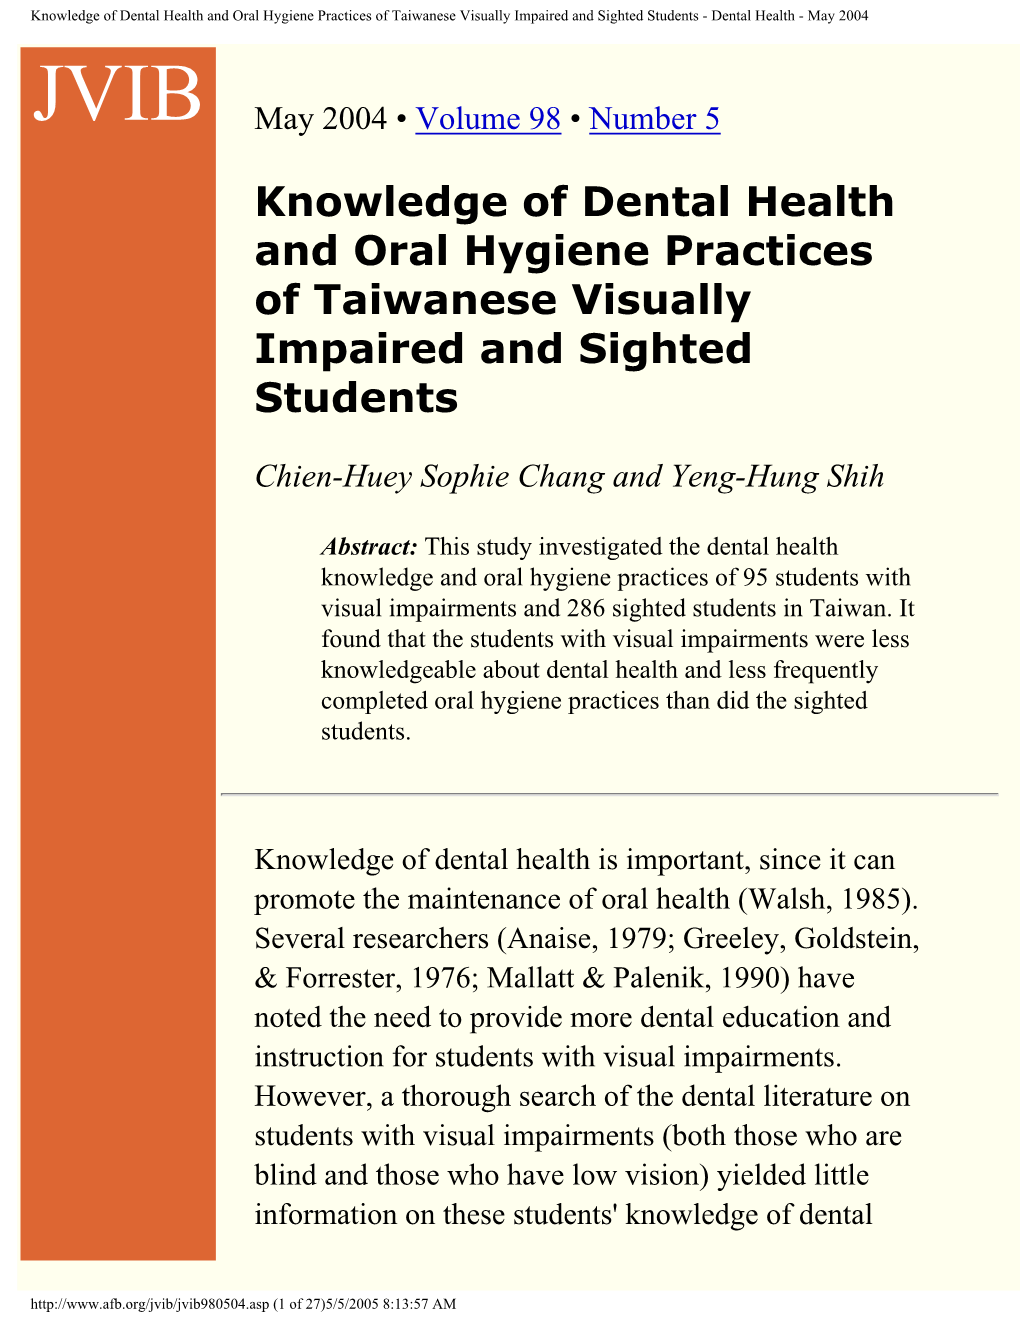 Dental Health and Oral Hygiene Practices of Taiwanese Visually Impaired and Sighted Students - Dental Health - May 2004